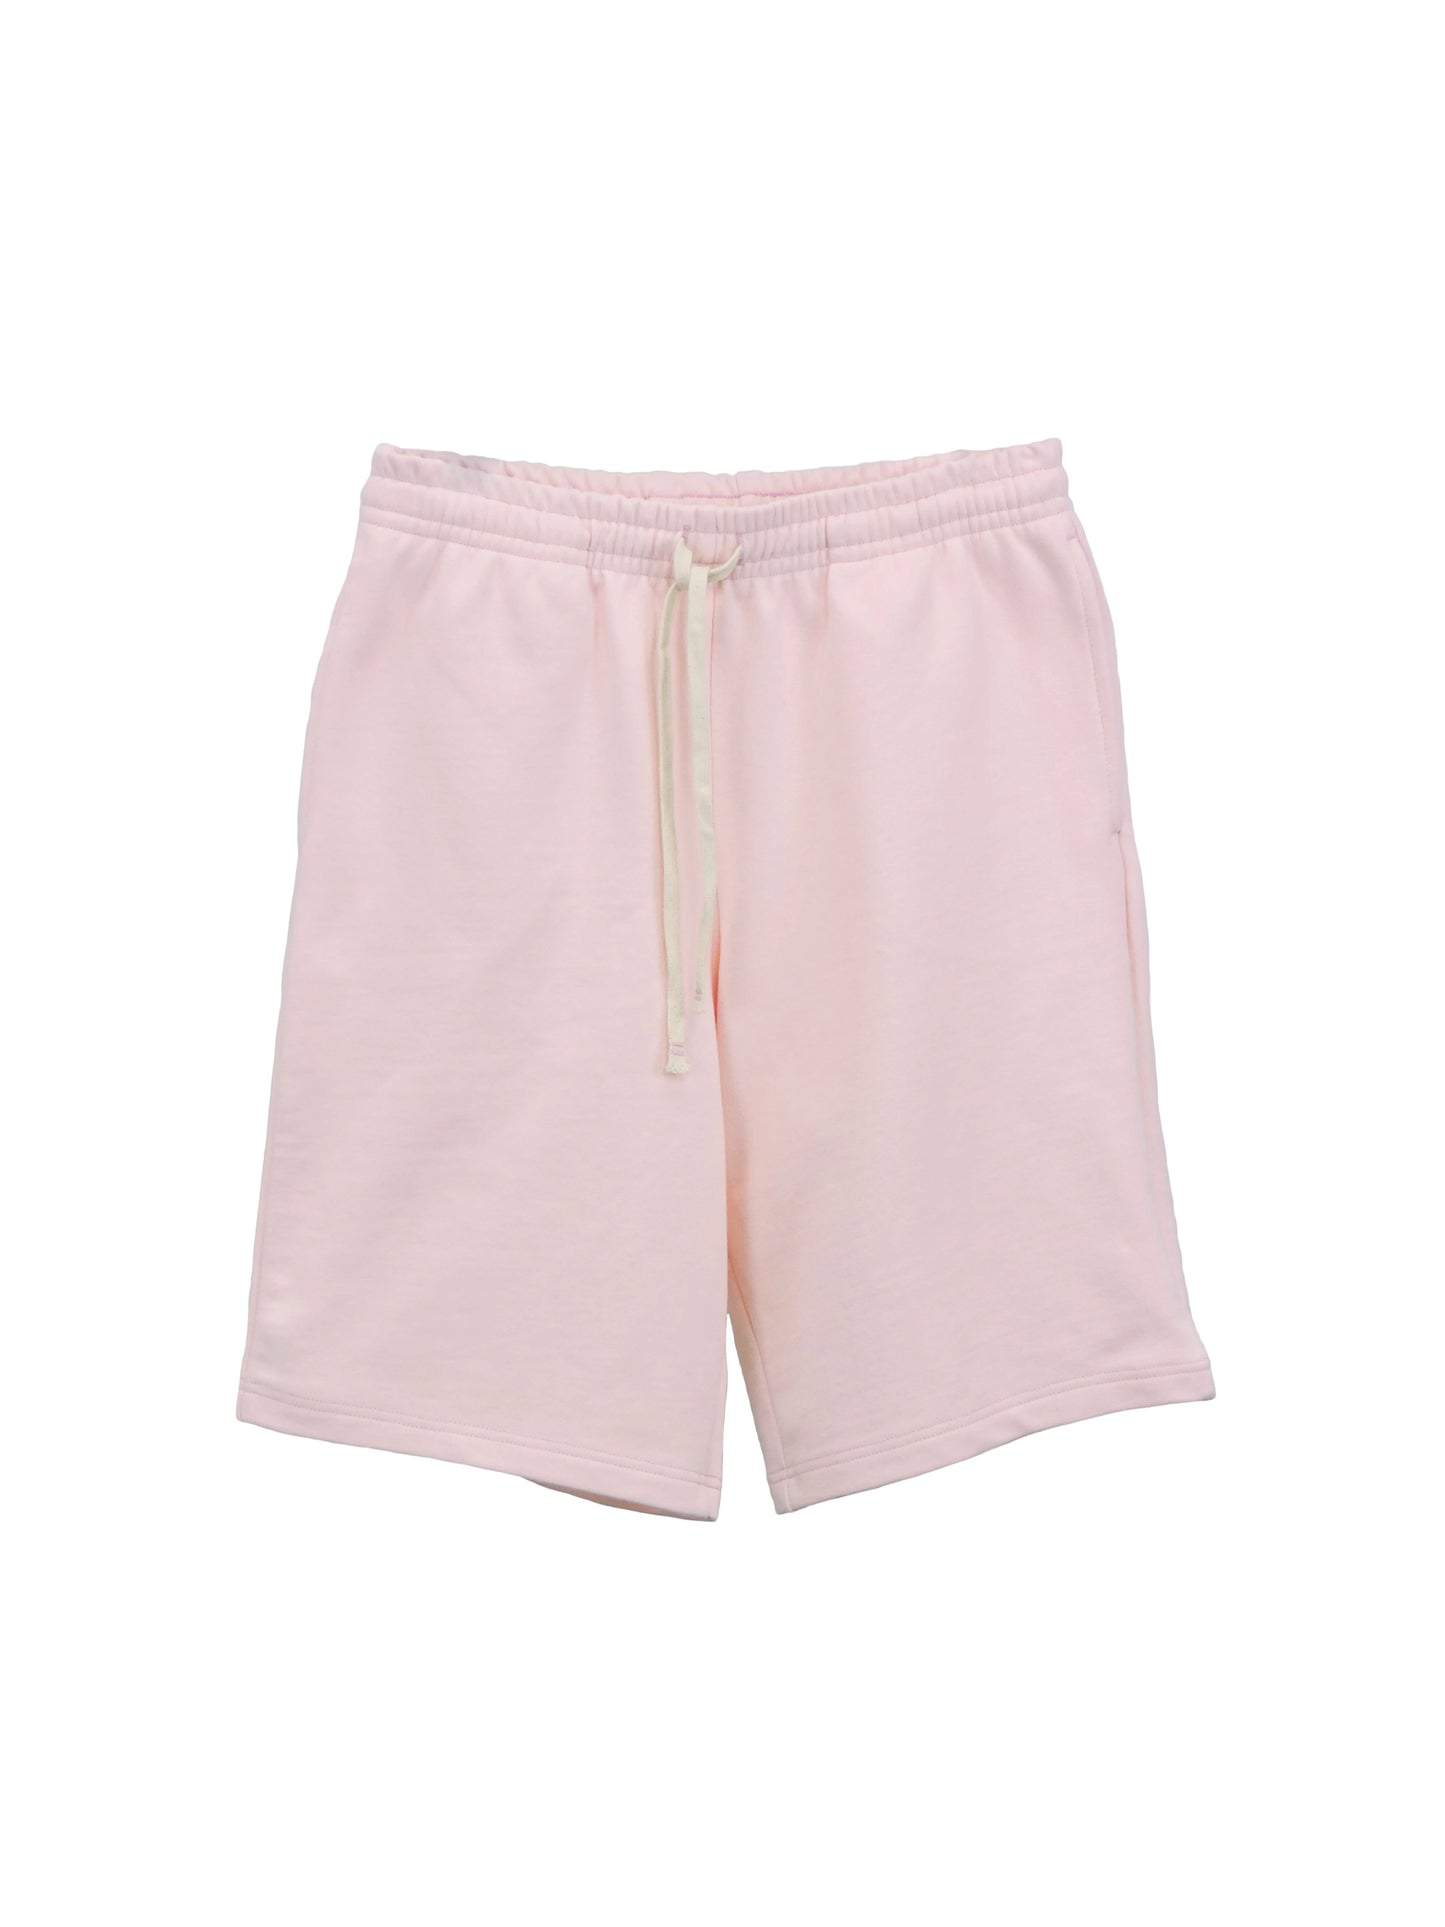 Pale Pink Long Shorts with White Drawstrings and Side Pockets